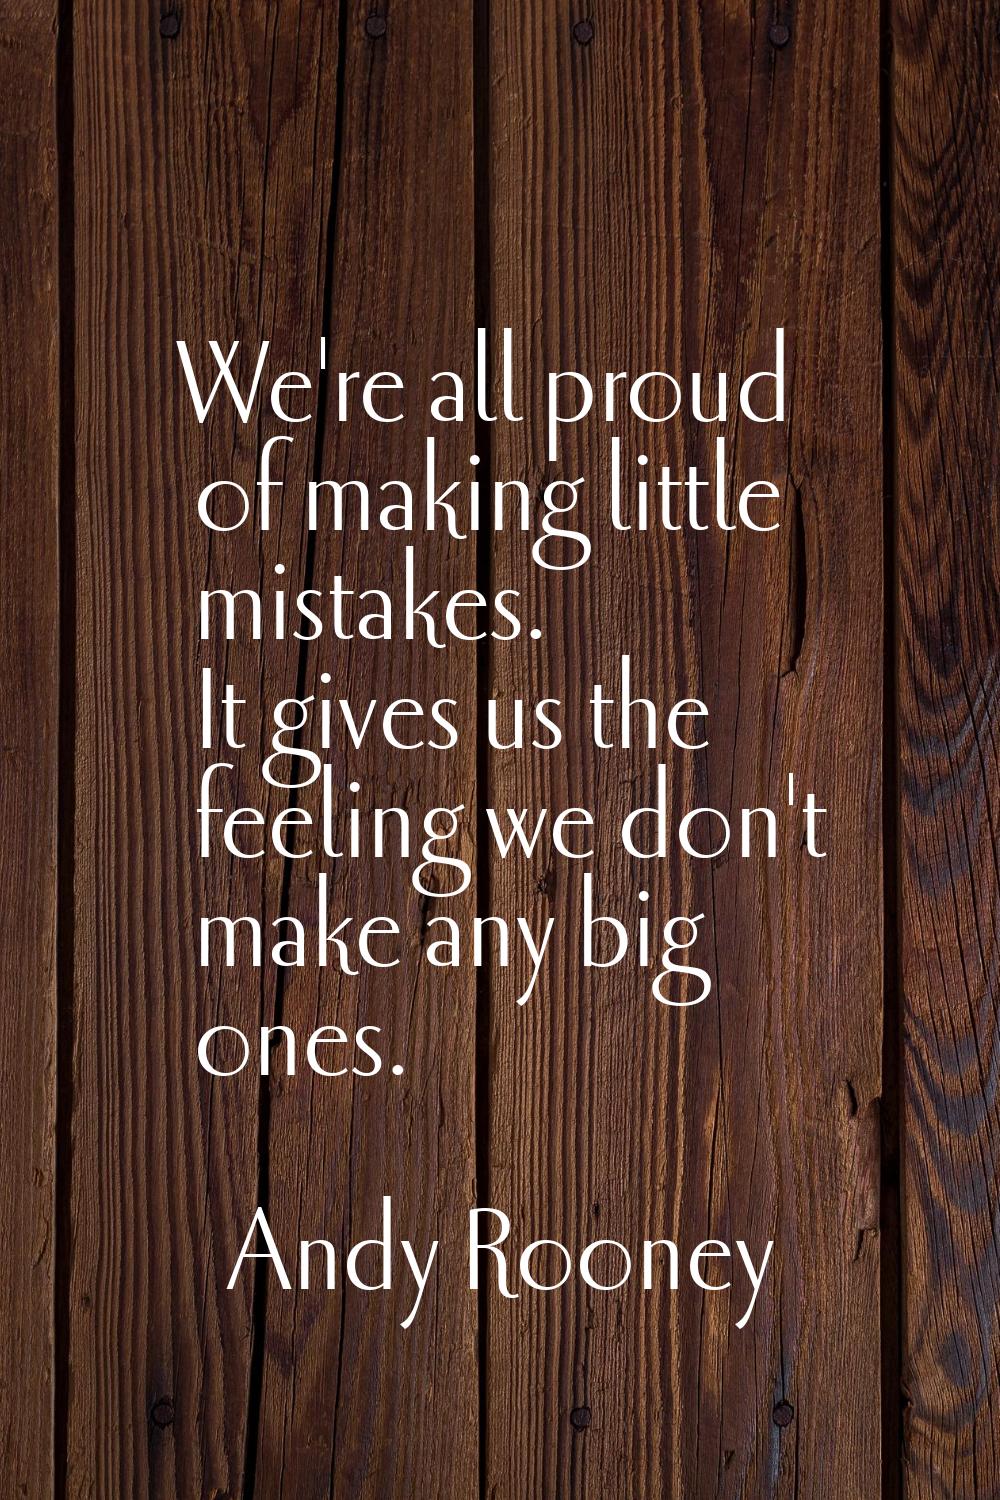 We're all proud of making little mistakes. It gives us the feeling we don't make any big ones.